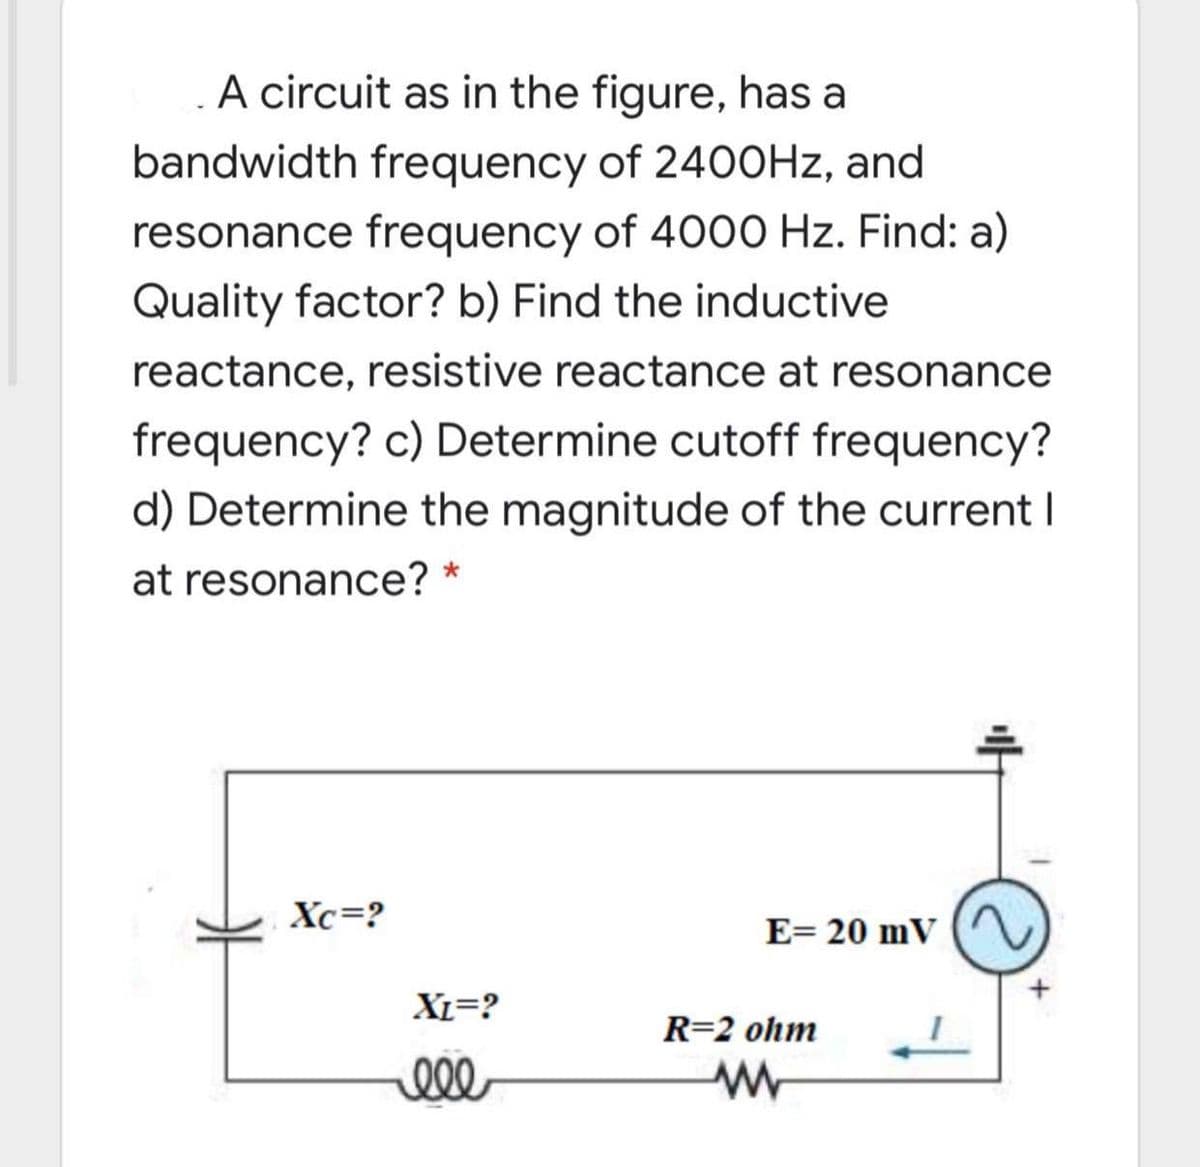 A circuit as in the figure, has a
bandwidth frequency of 240OHZ, and
resonance frequency of 4000 Hz. Find: a)
Quality factor? b) Find the inductive
reactance, resistive reactance at resonance
frequency? c) Determine cutoff frequency?
d) Determine the magnitude of the current I
at resonance? *
Xc=?
E= 20 mV
XL=?
R=2 ohm
ell
